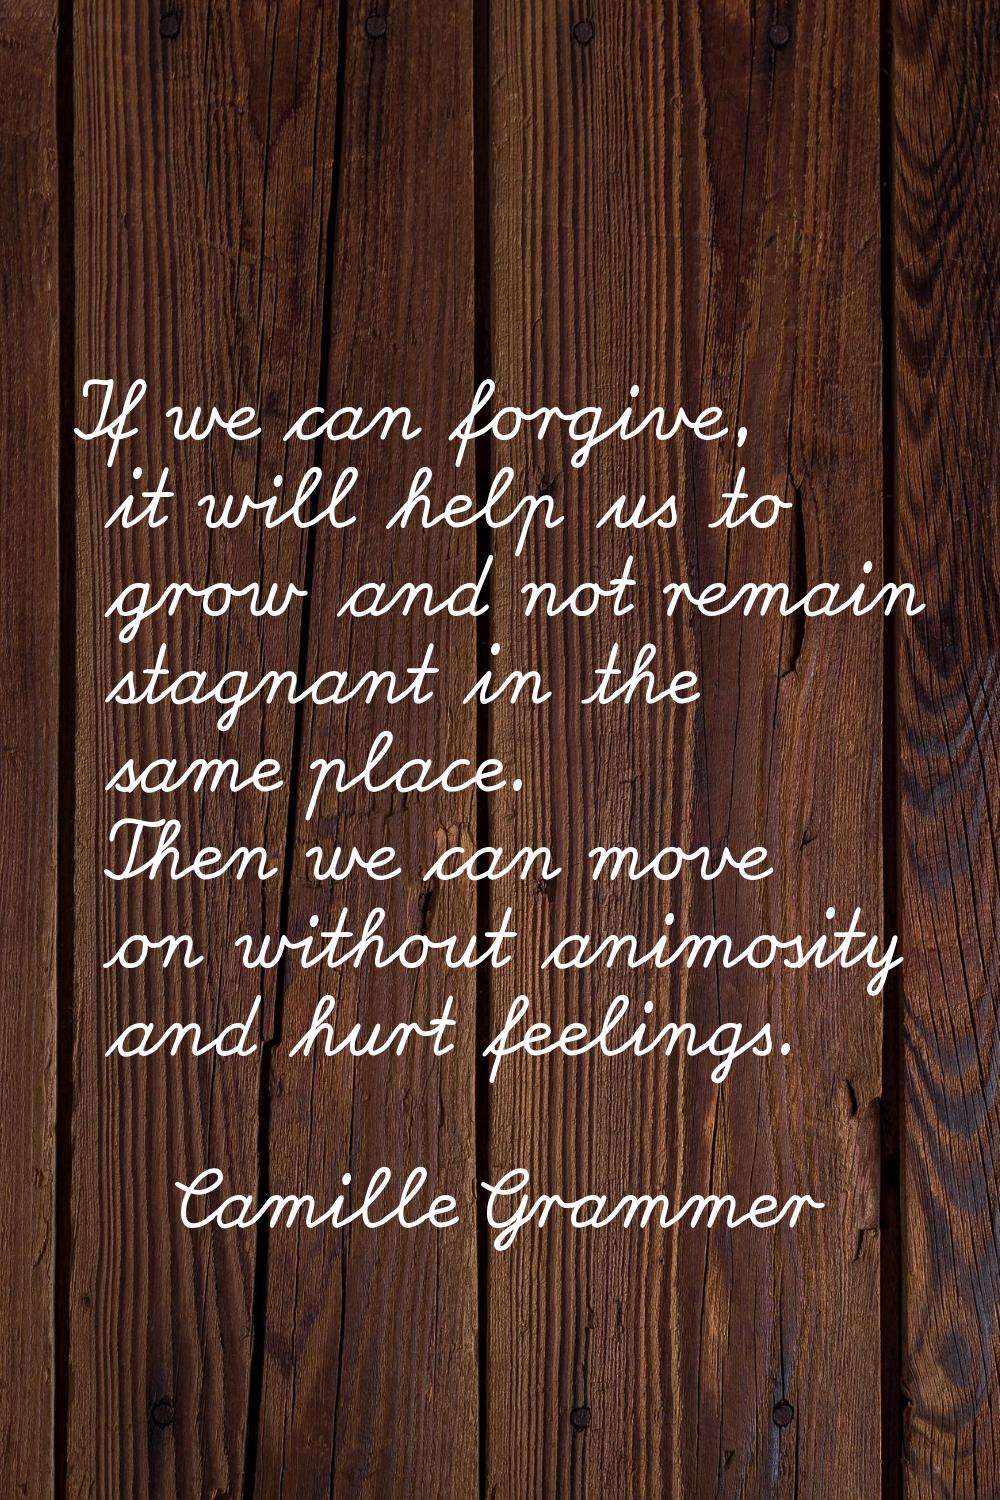 If we can forgive, it will help us to grow and not remain stagnant in the same place. Then we can m